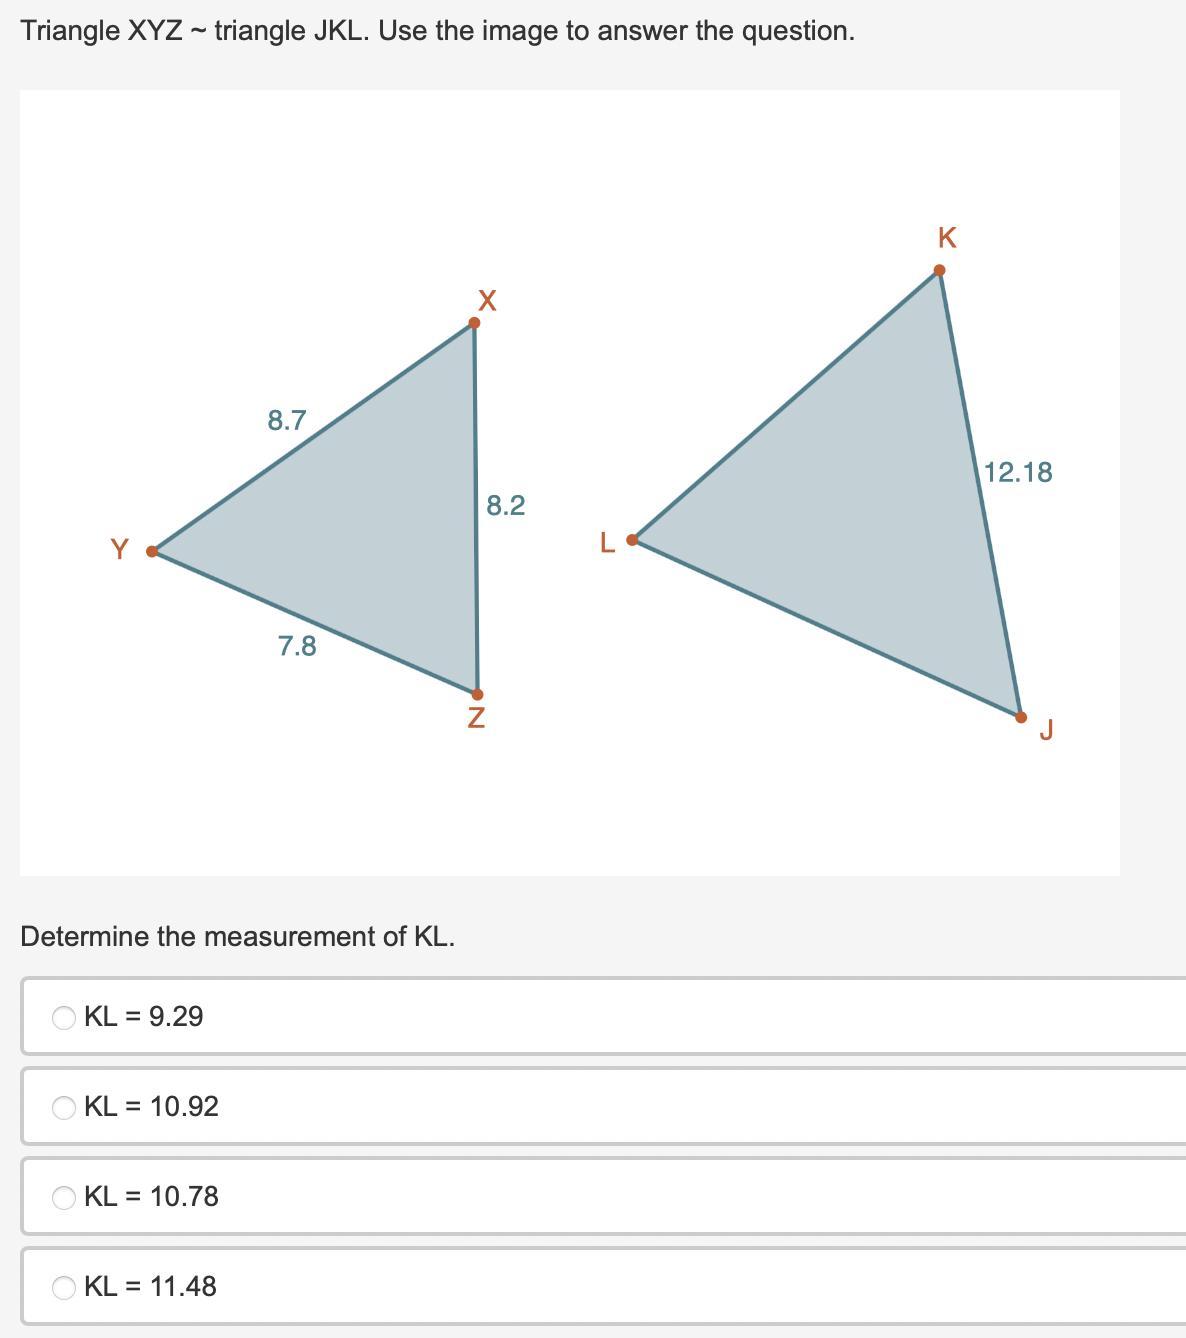 PLS HELP ASAPPPP!! WILL MARK BRAINLIESTTriangle XYZ ~ Triangle JKL. Use The Image To Answer The Question.